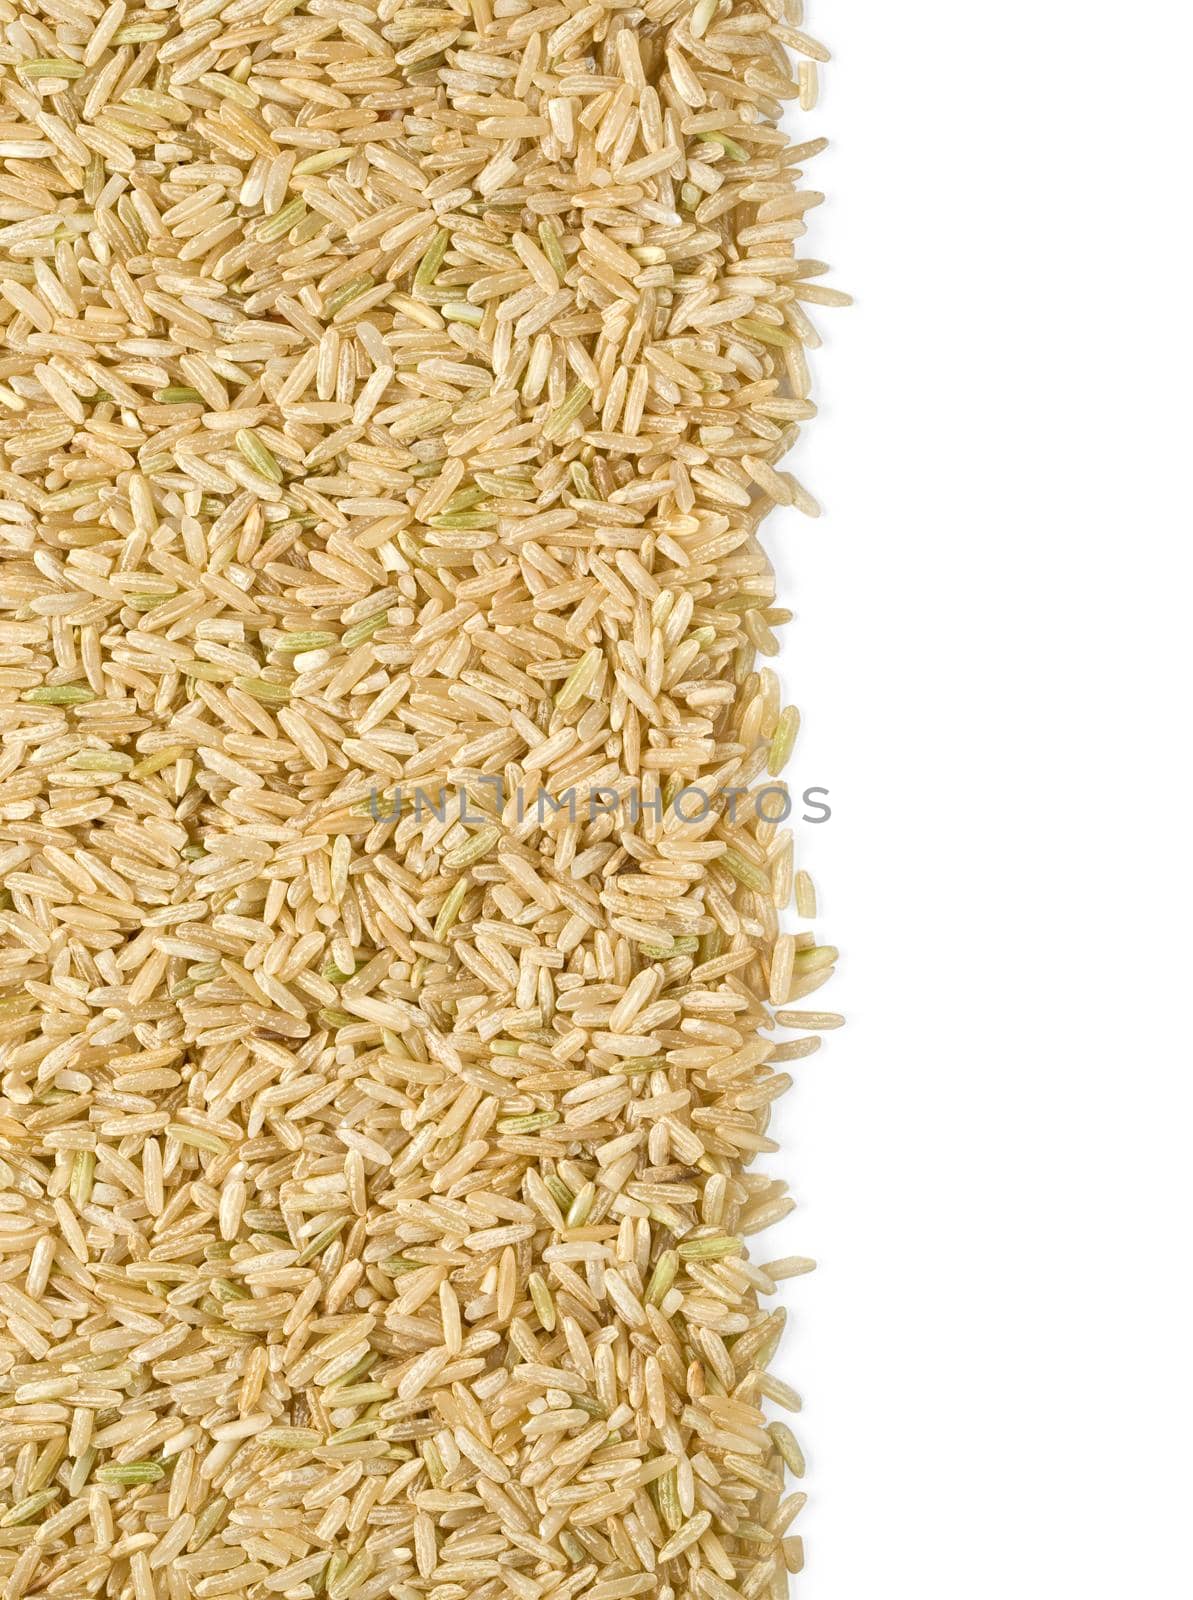 Brown rice background texture